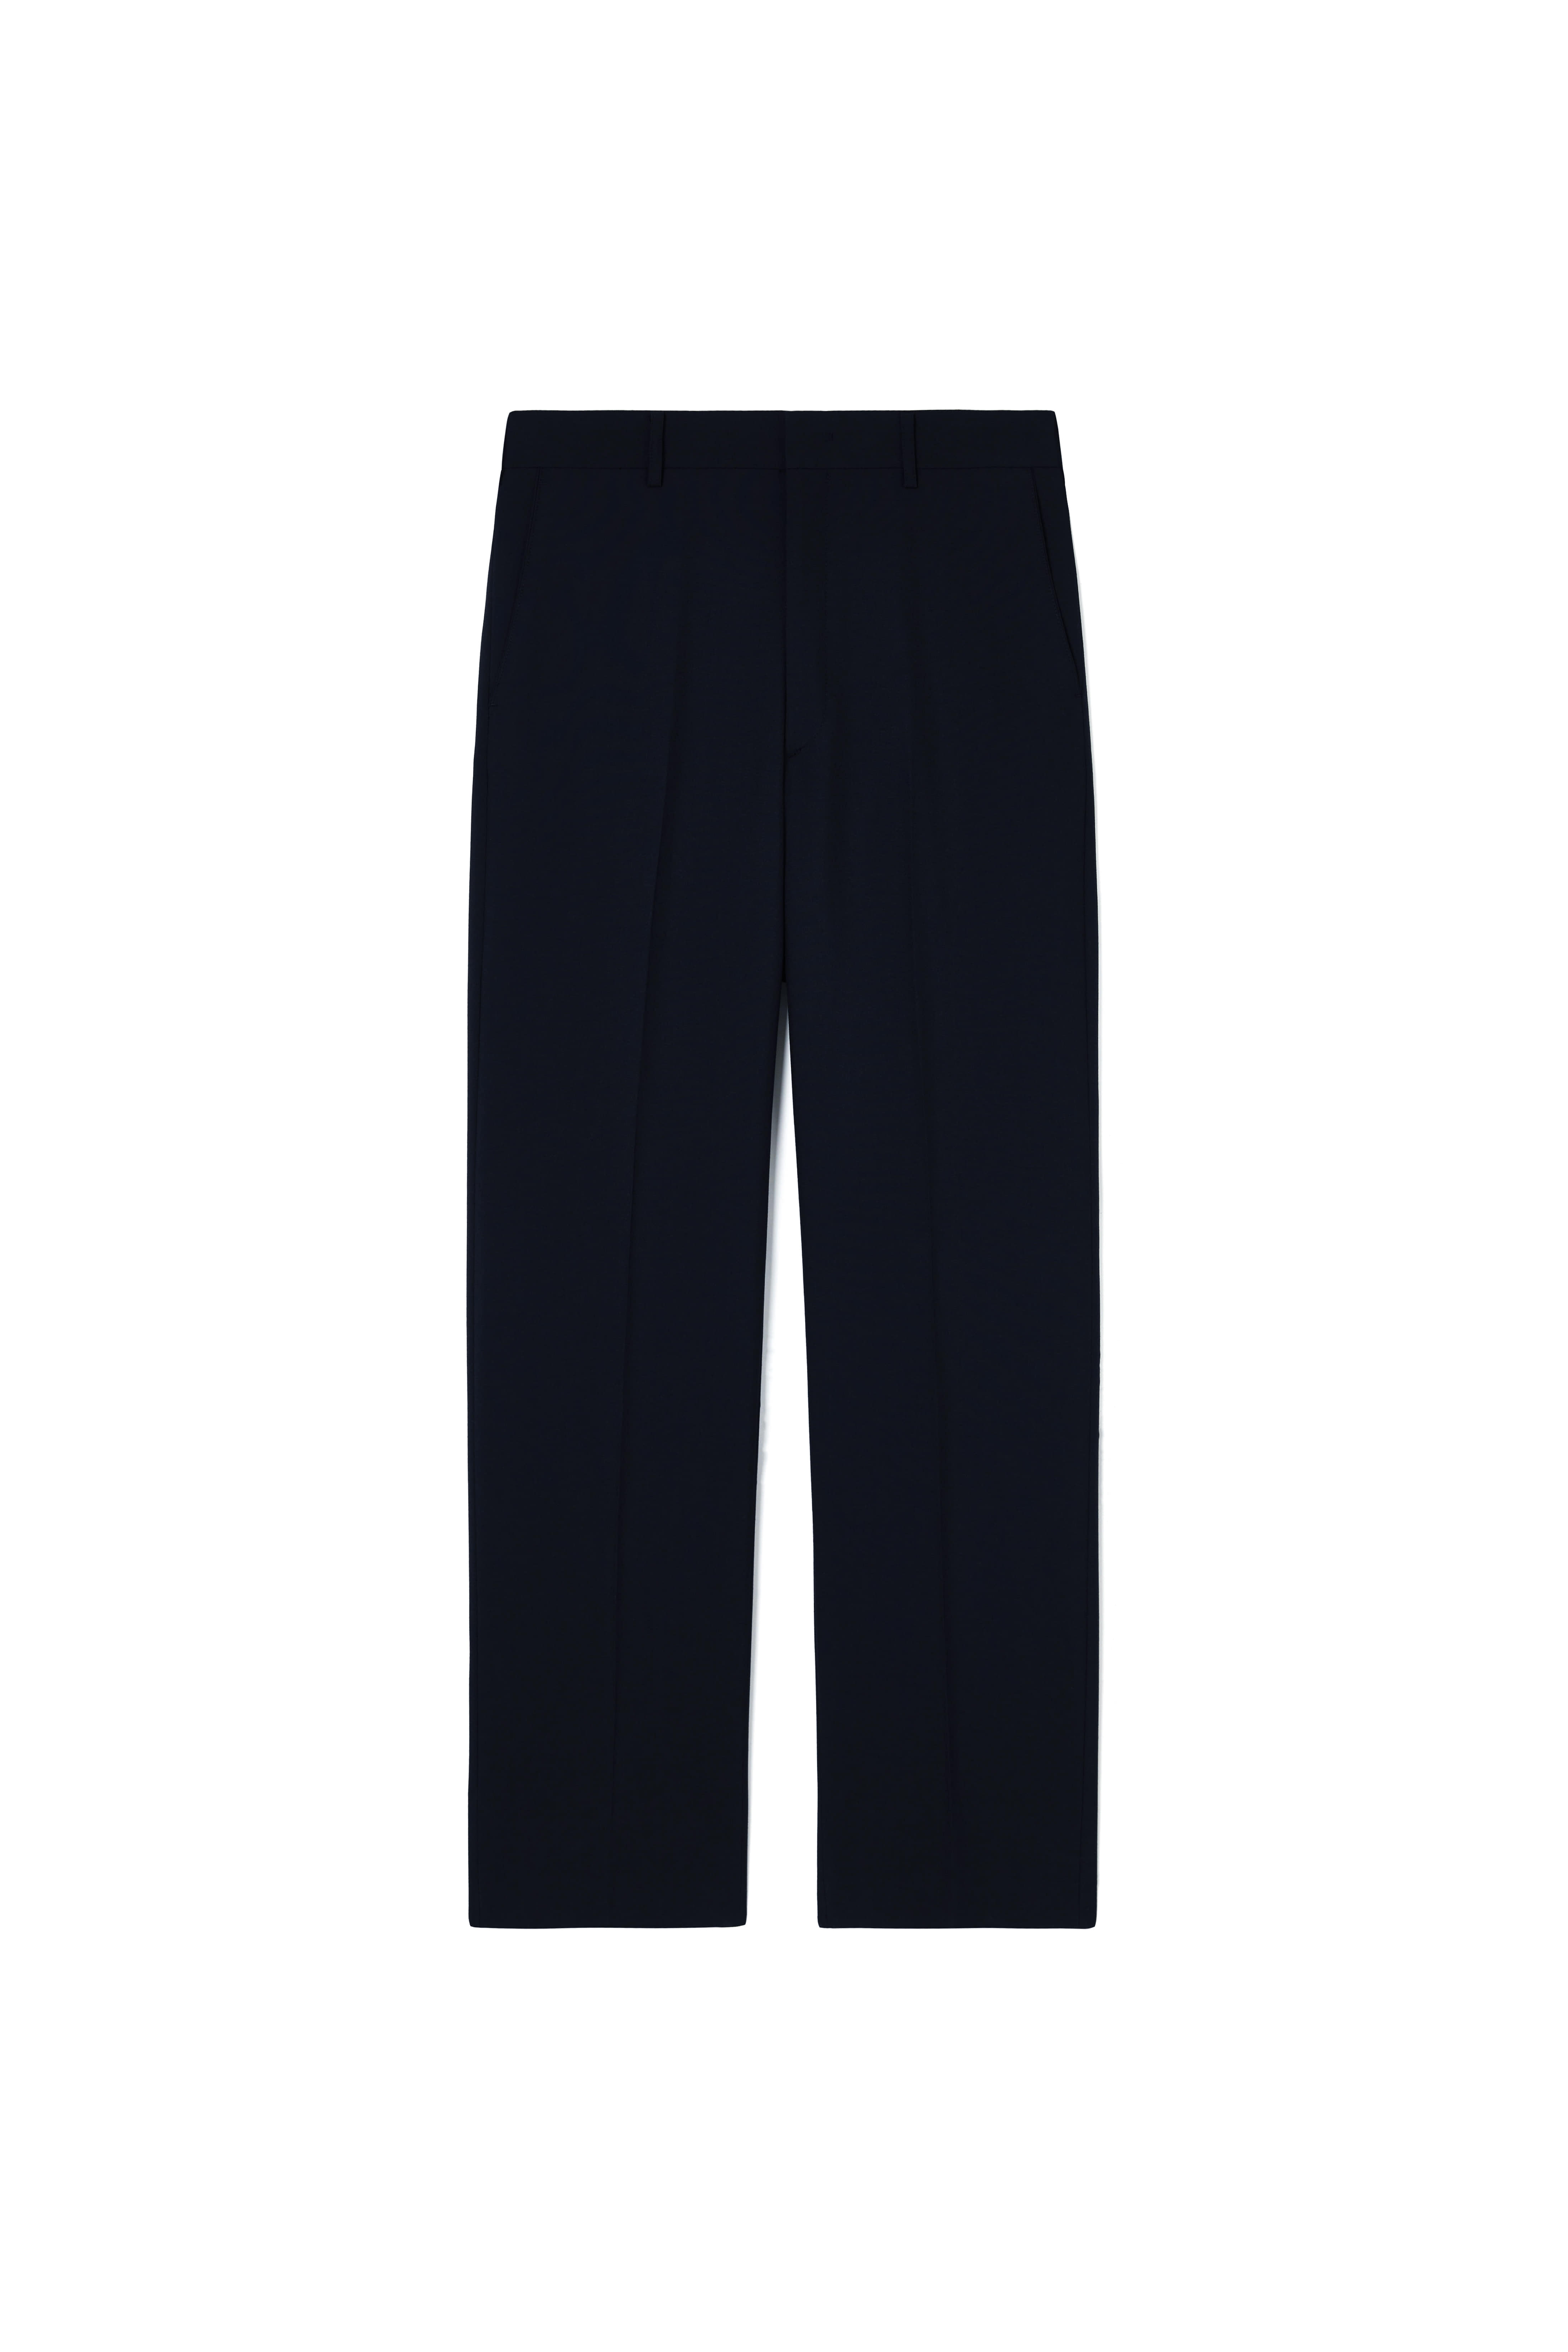 CIRCUSFALSE: WIDE PANTS IN NAVY